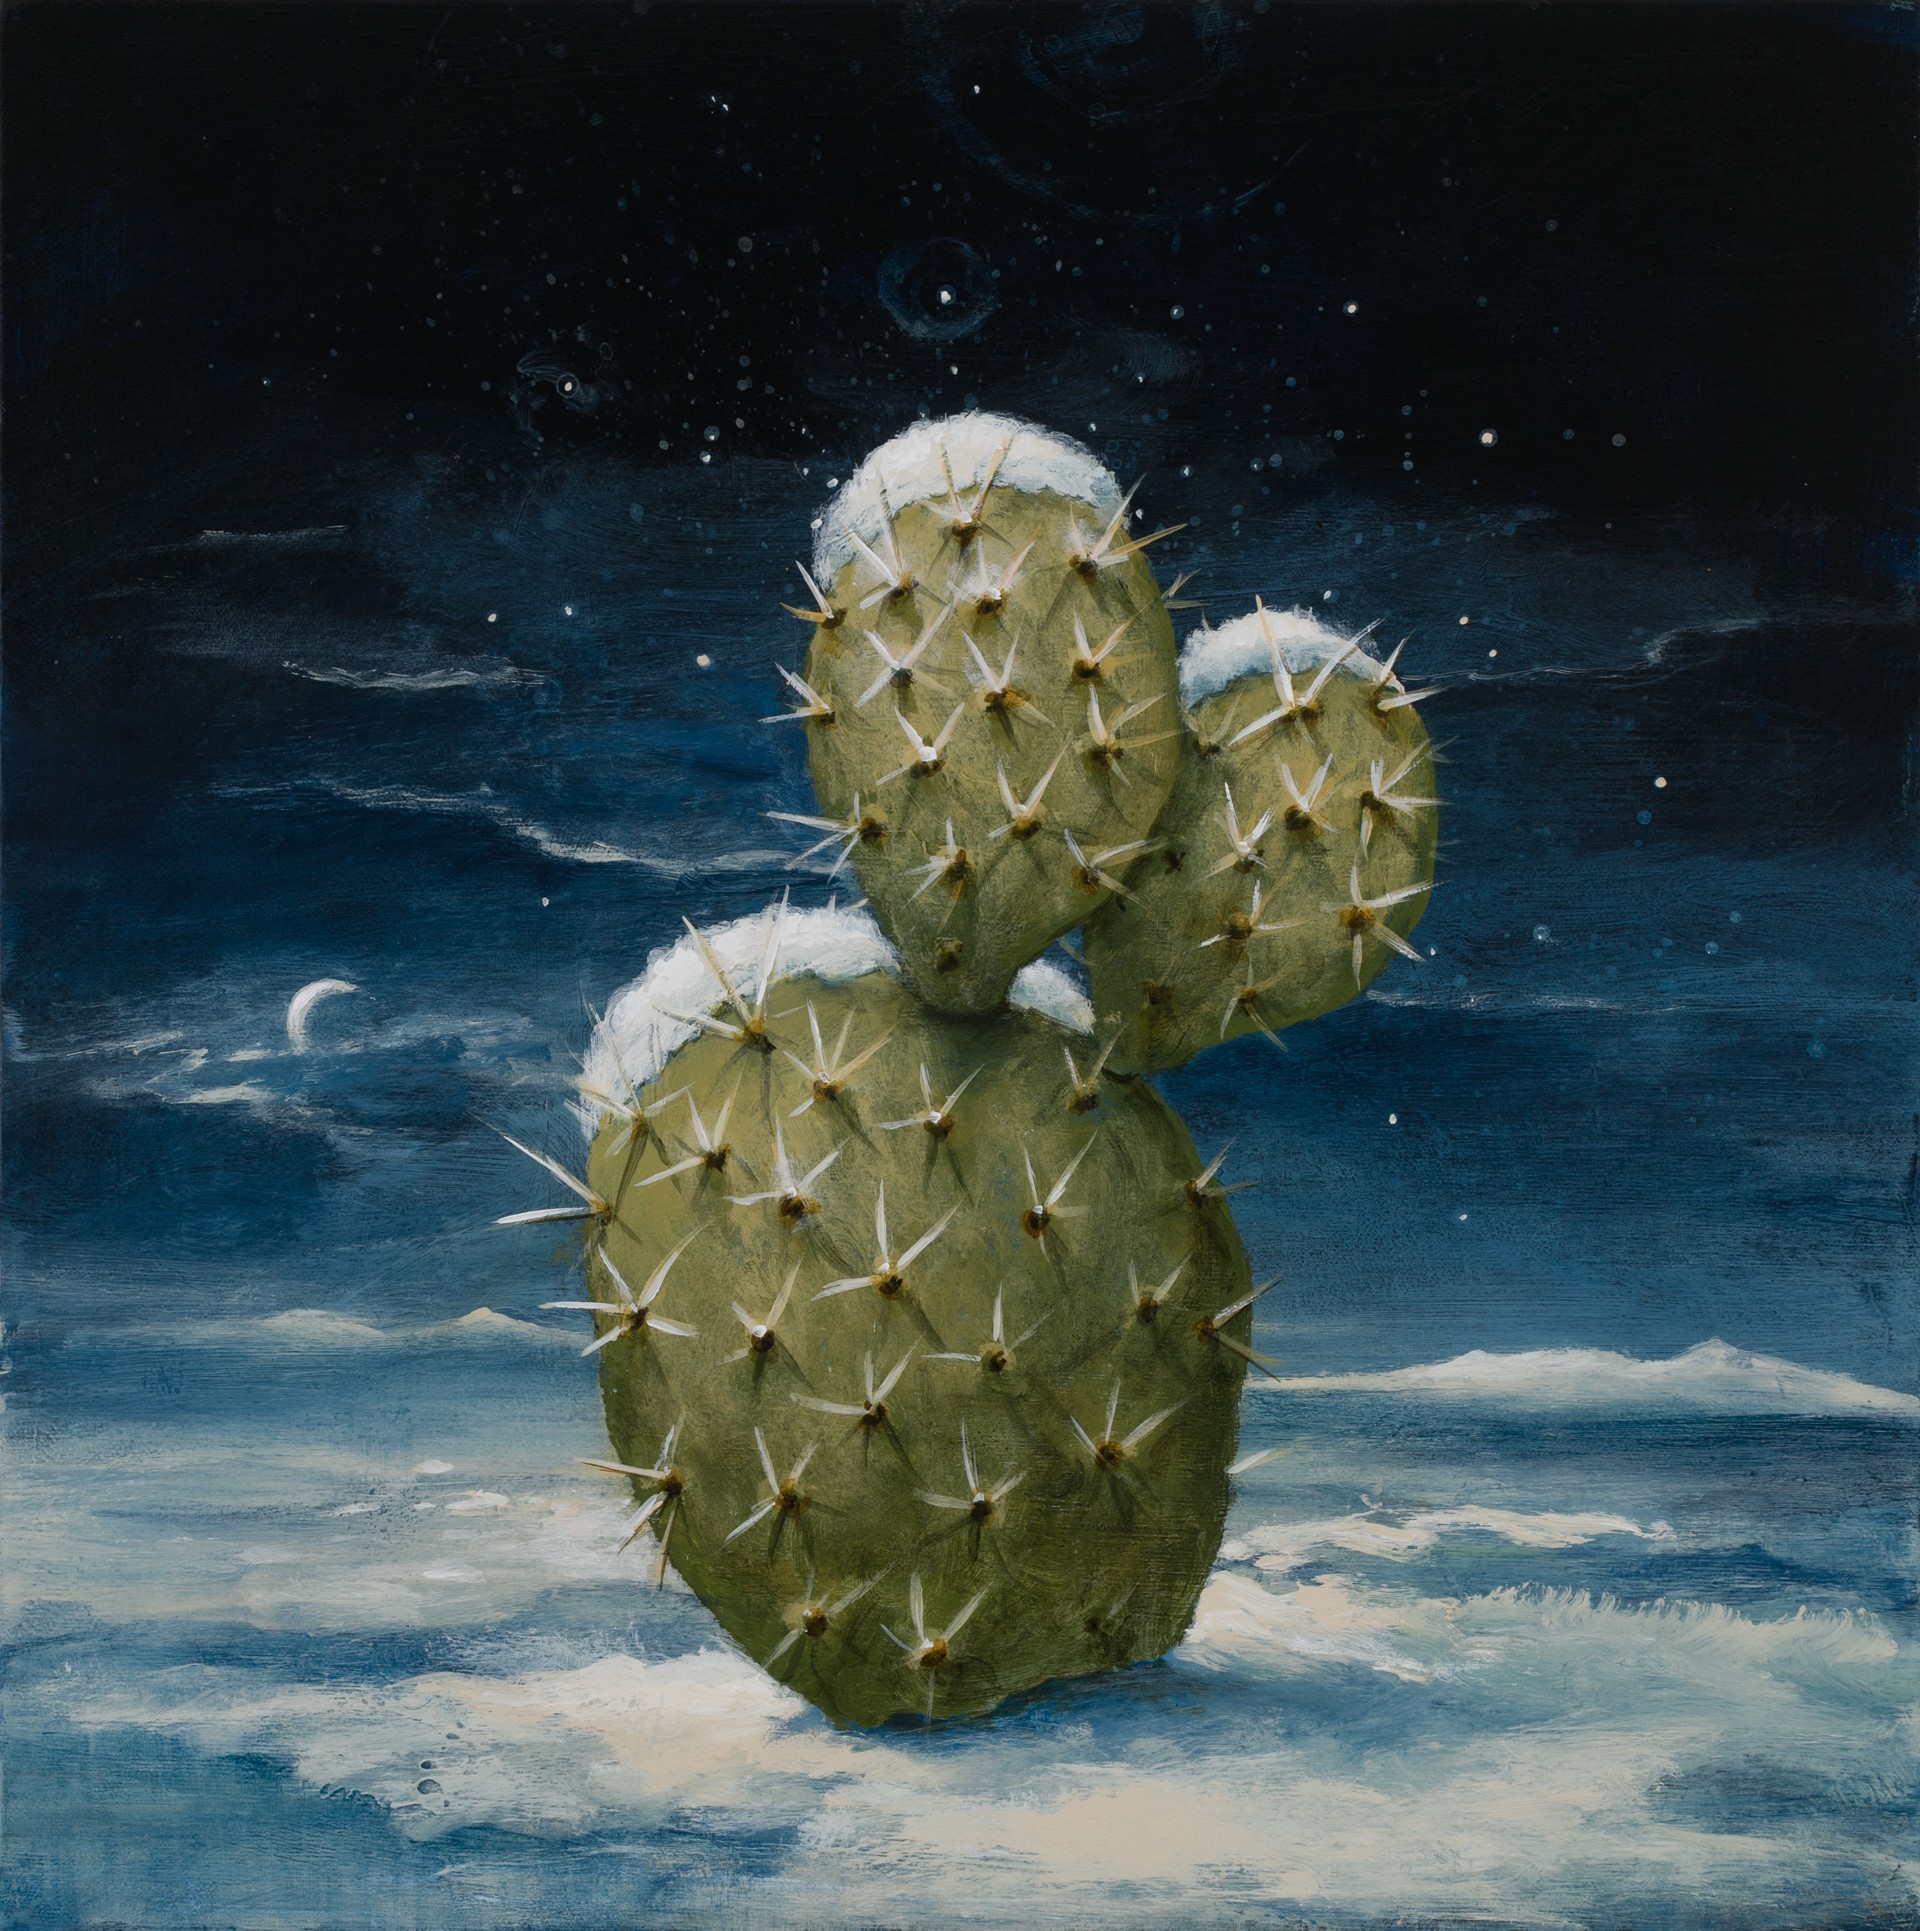 A Very Cold Night by Kevin Sloan